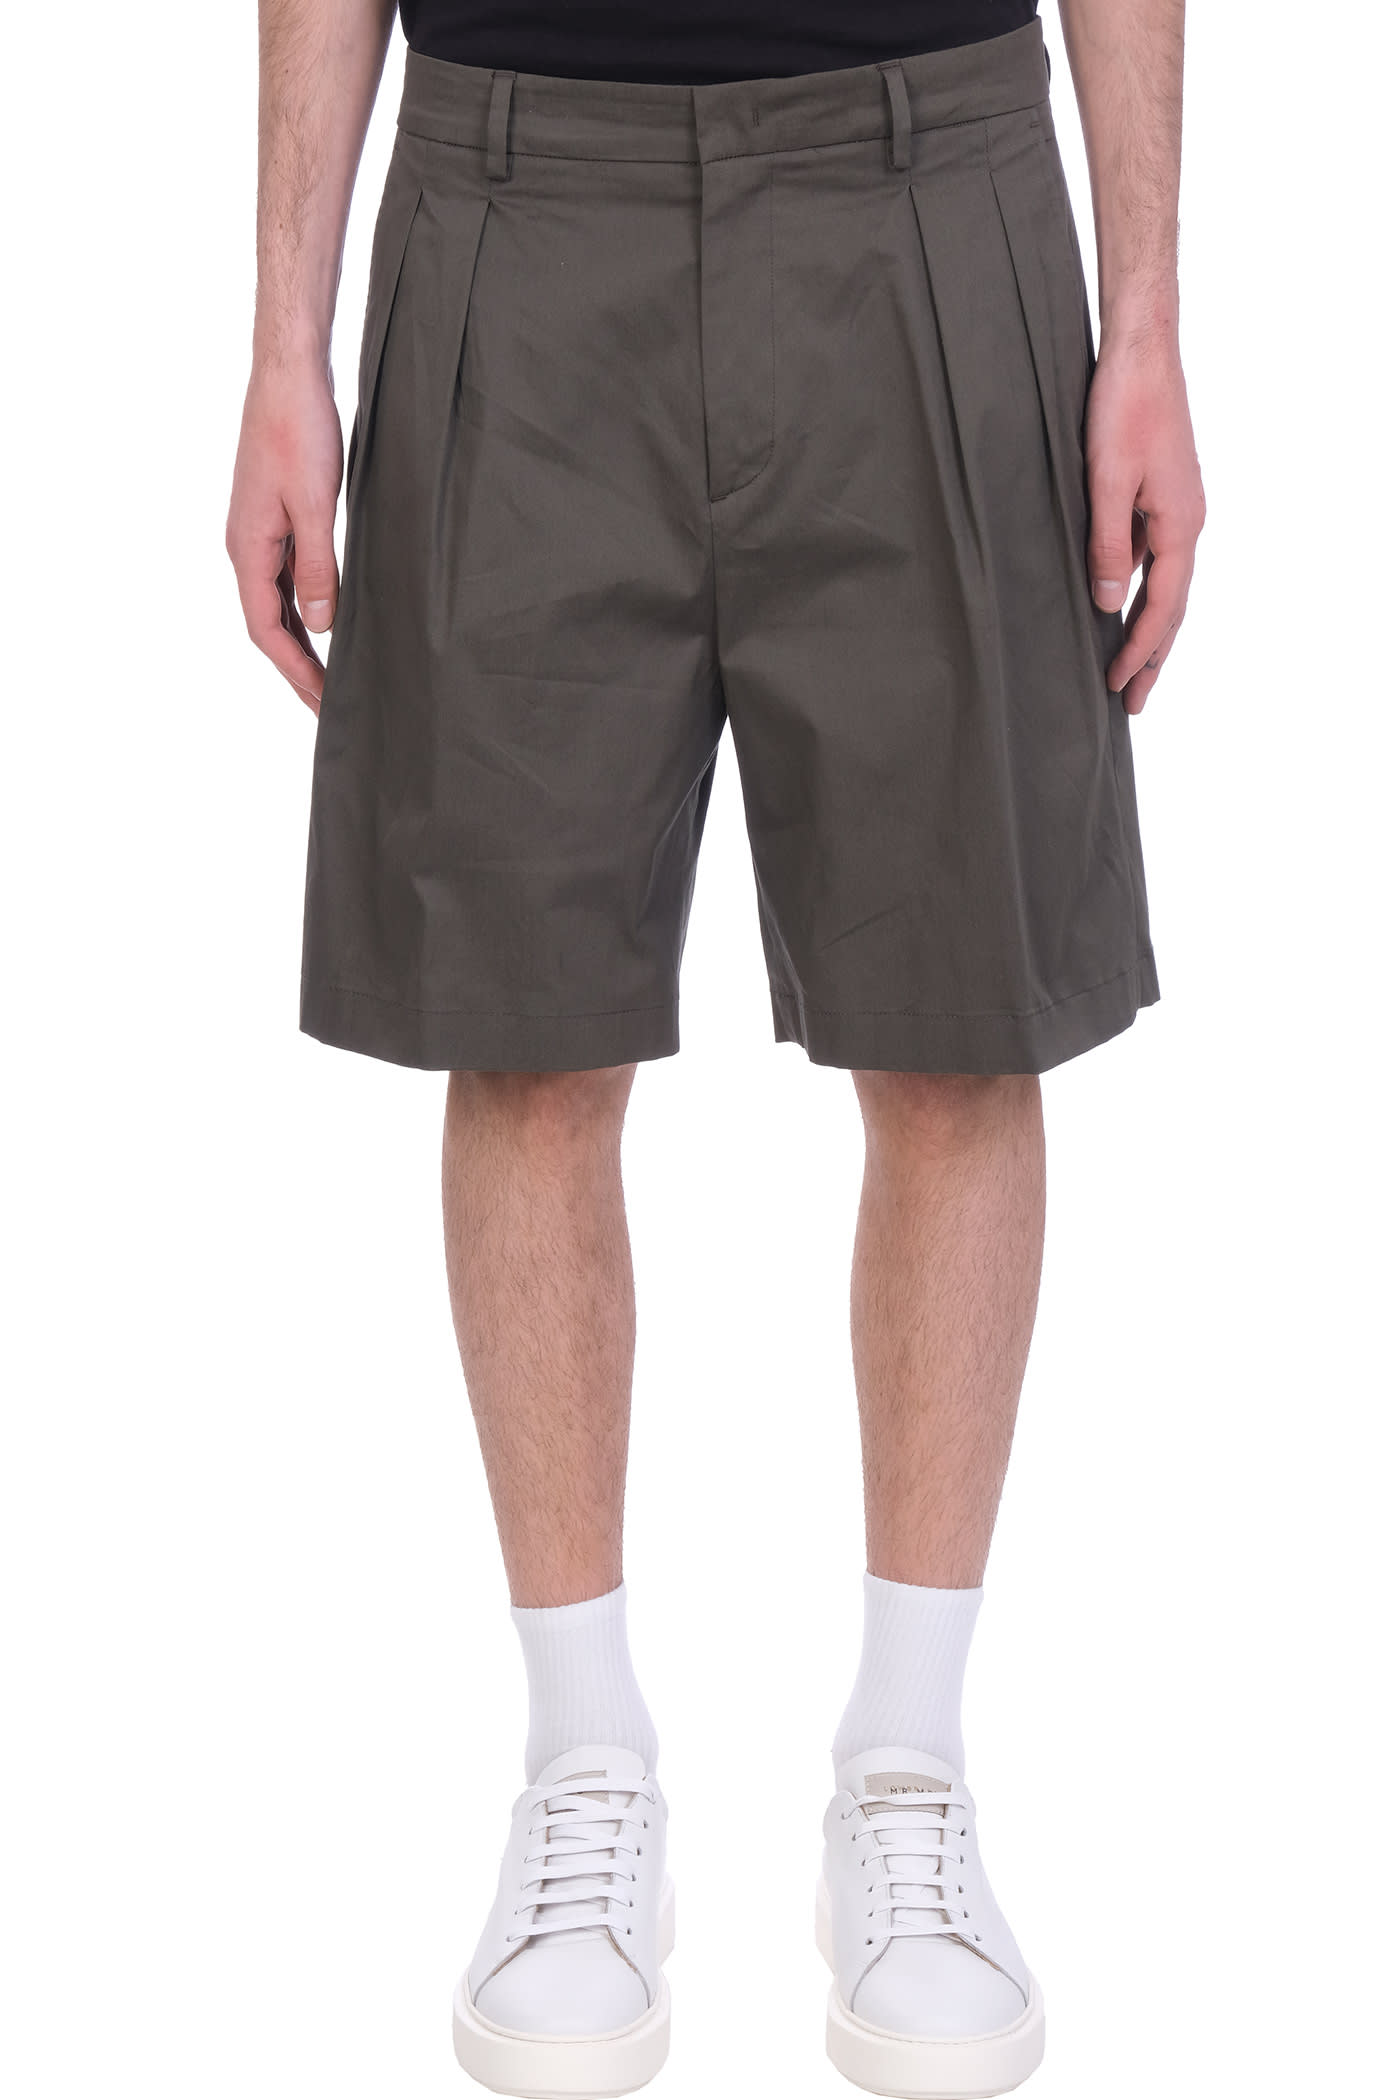 LOW BRAND MIAMI SHORTS IN GREEN COTTON,L1PSS215721V009